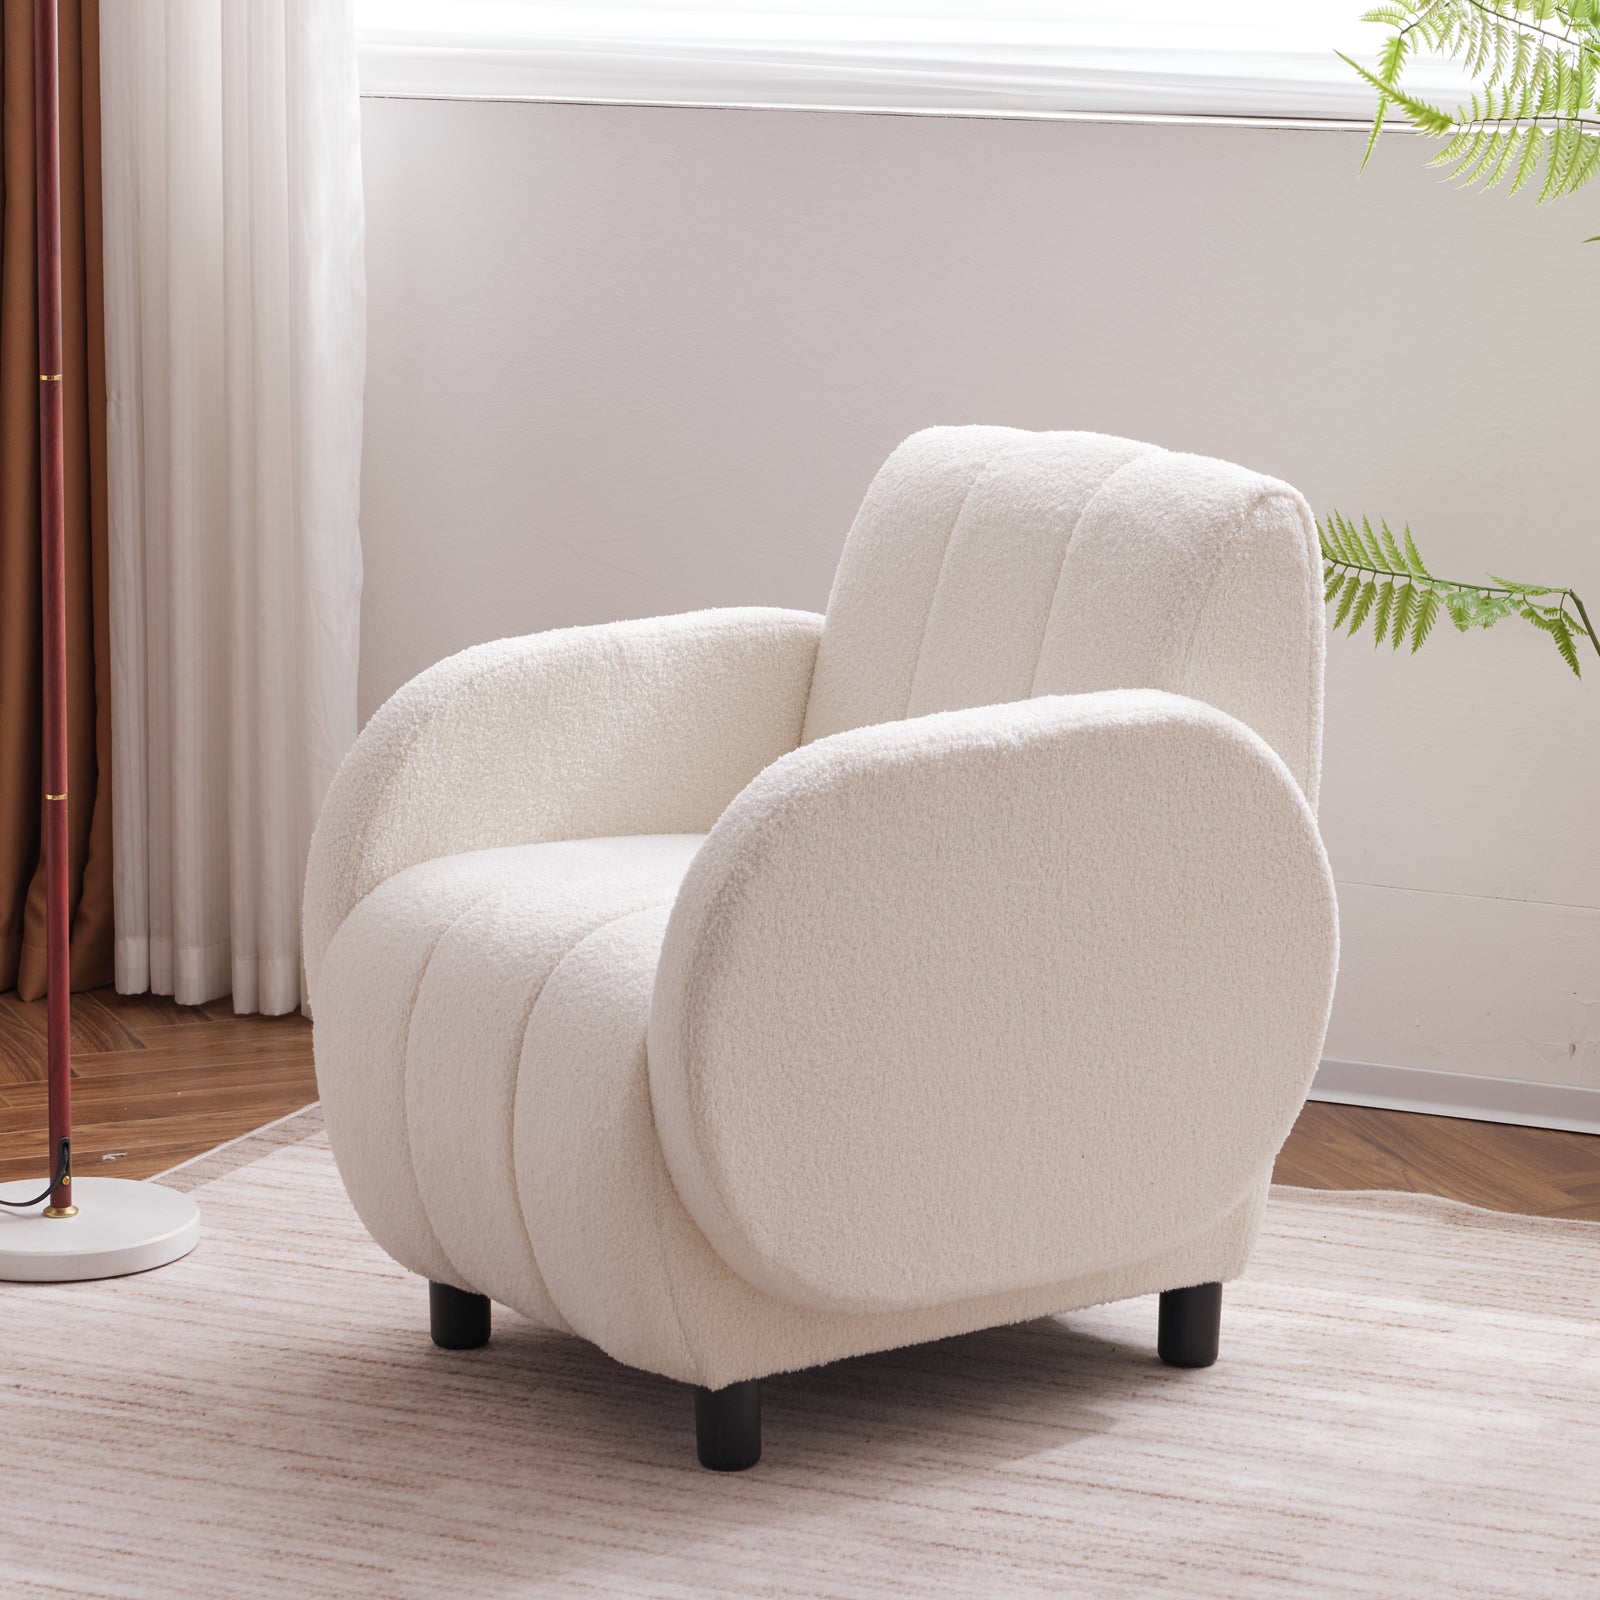 Bellemave Modern Fabric Upholstered Armchair with Upholstered Reading Chair